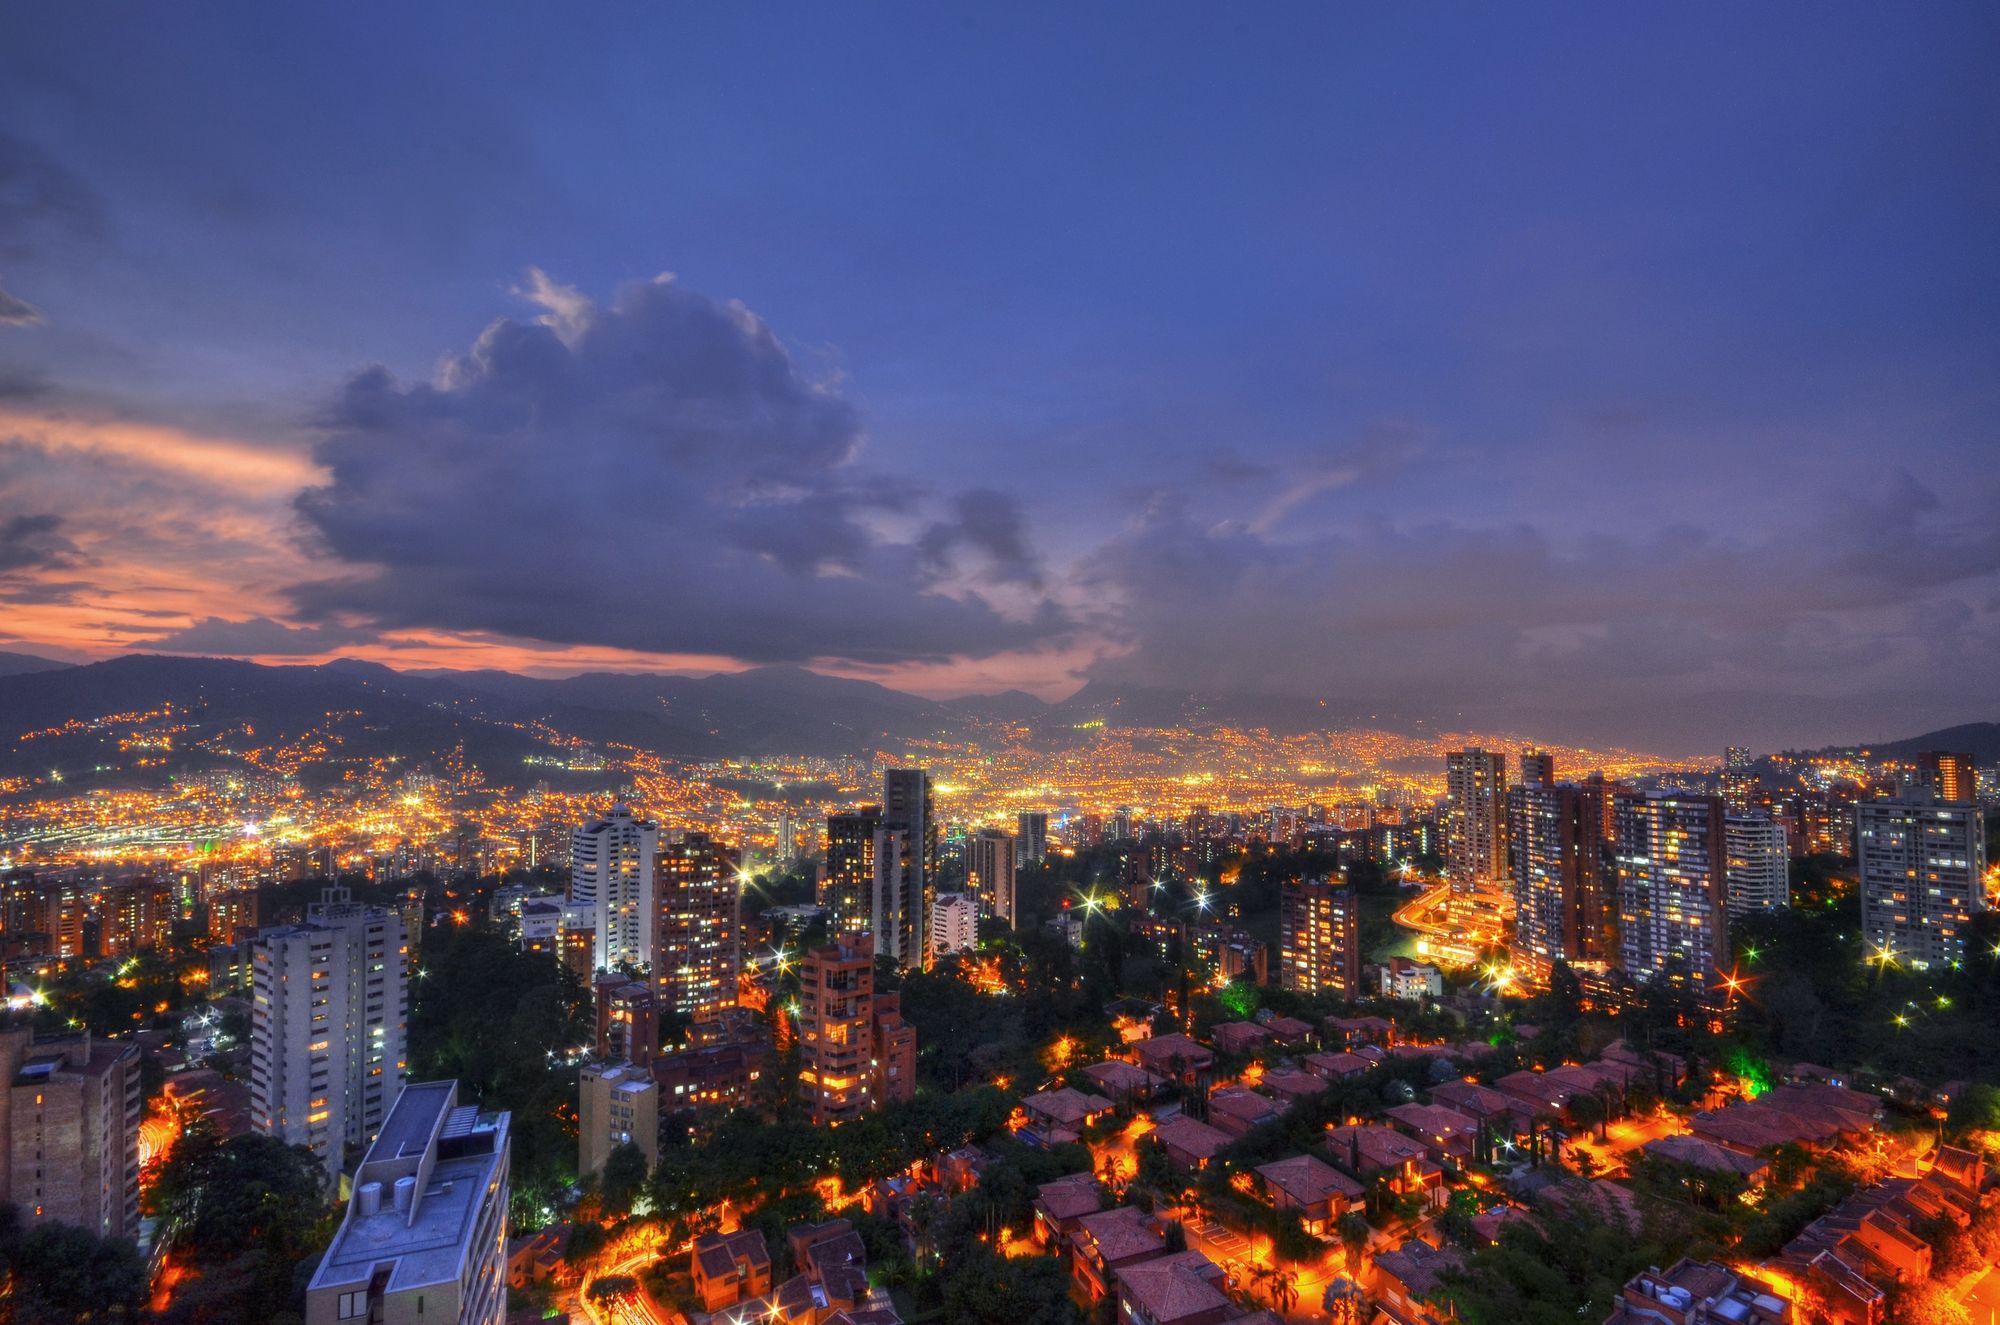 A skyline in Colombia